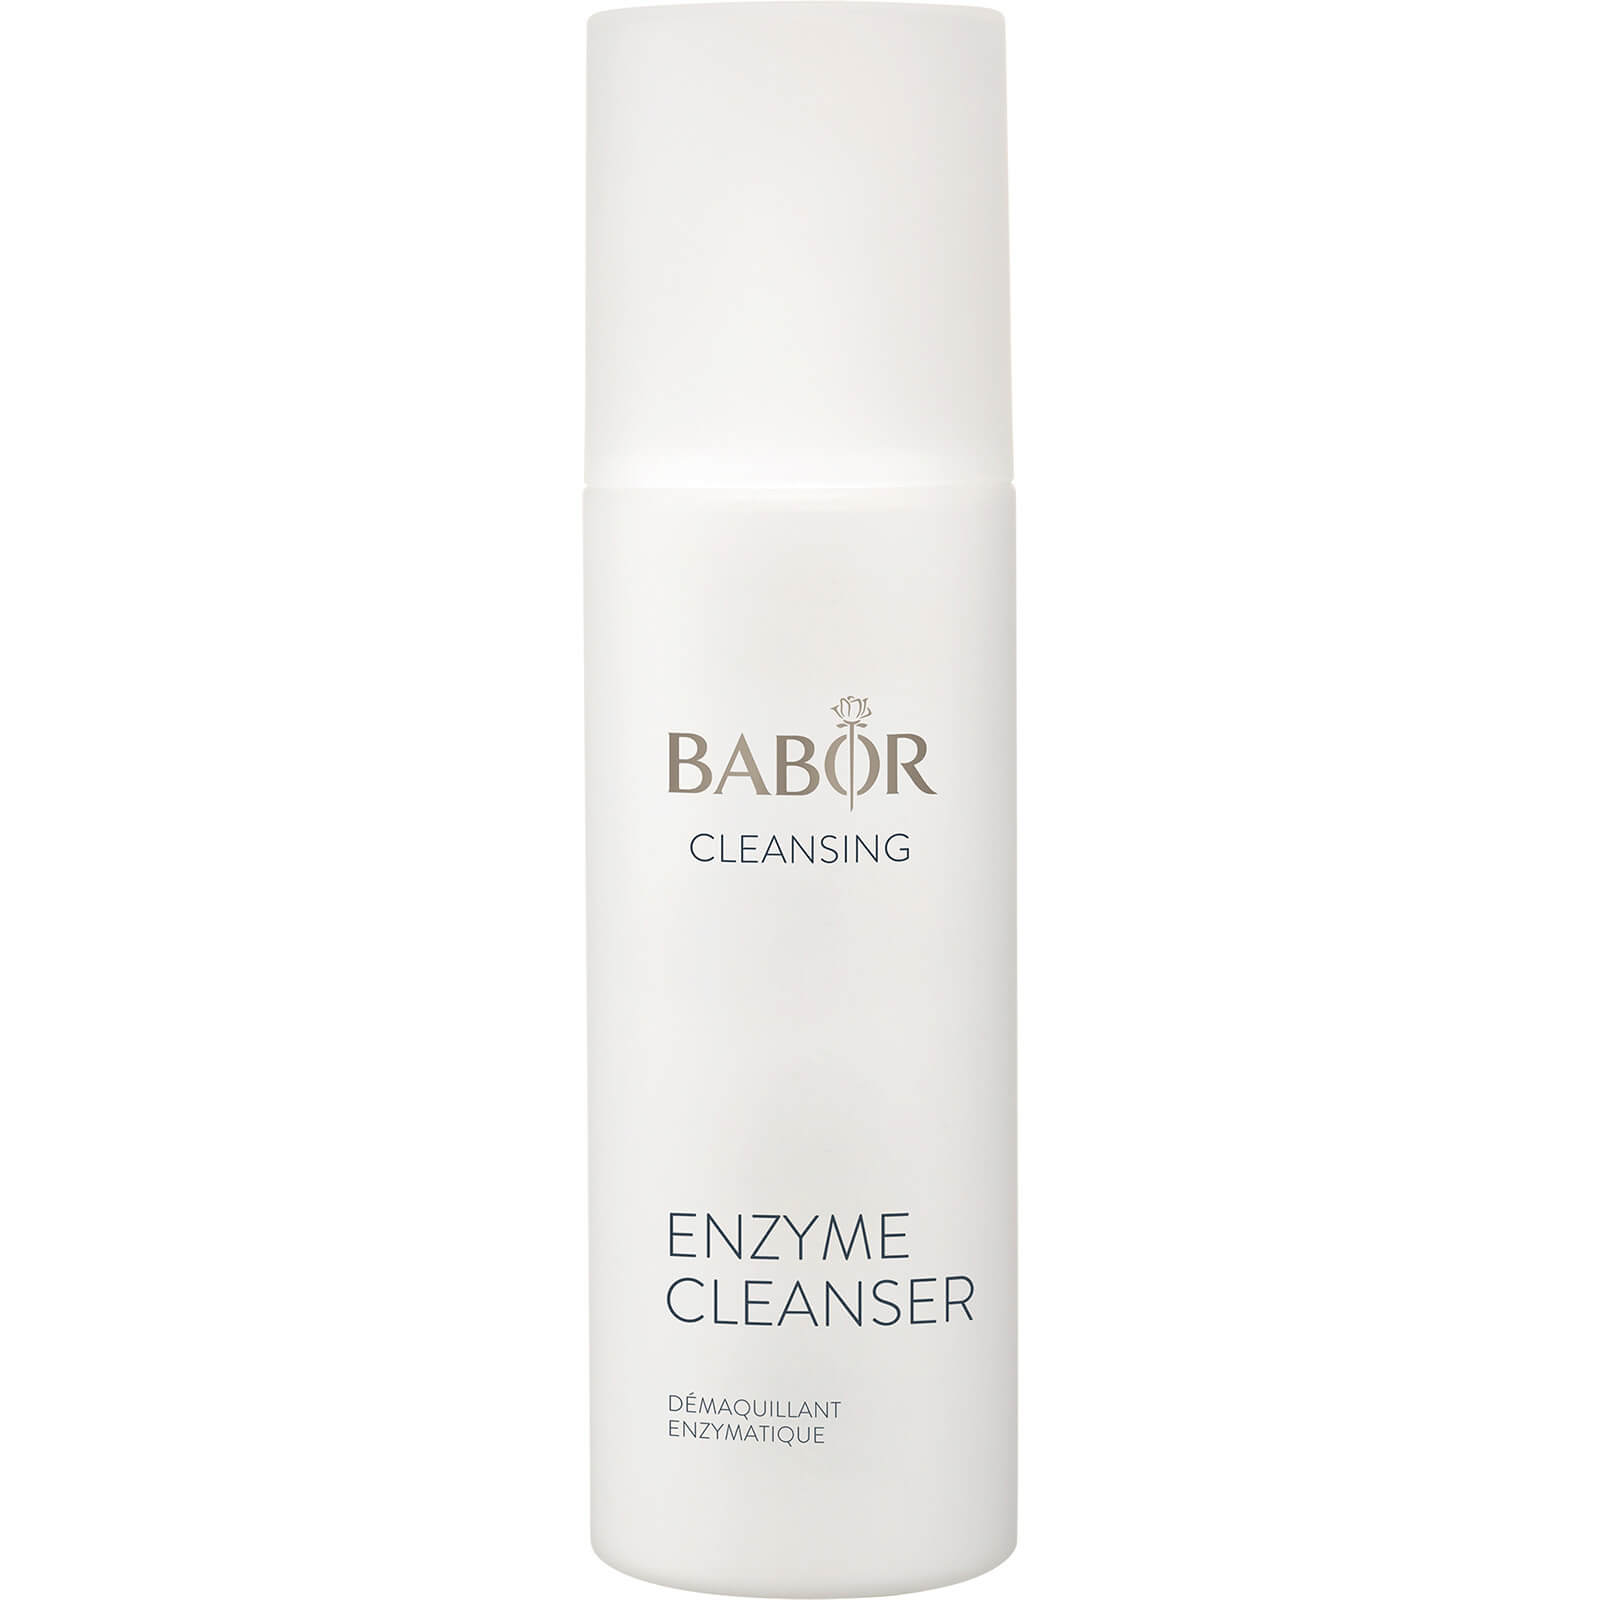 BABOR Cleansing Enzyme Cleanser 75g lookfantastic.com imagine